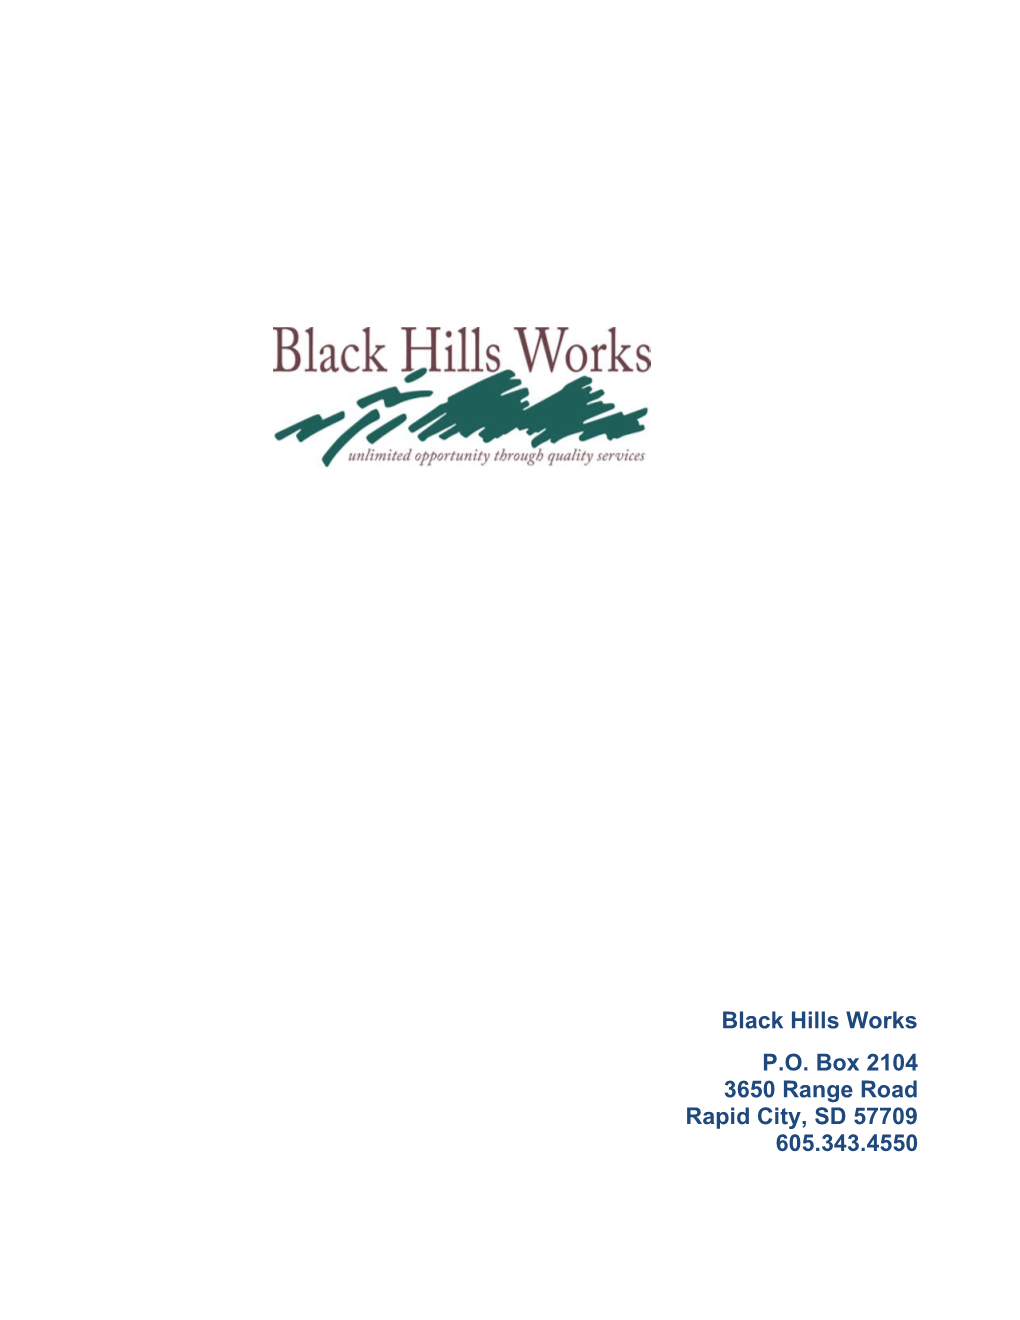 Welcome to the Blackhills Works